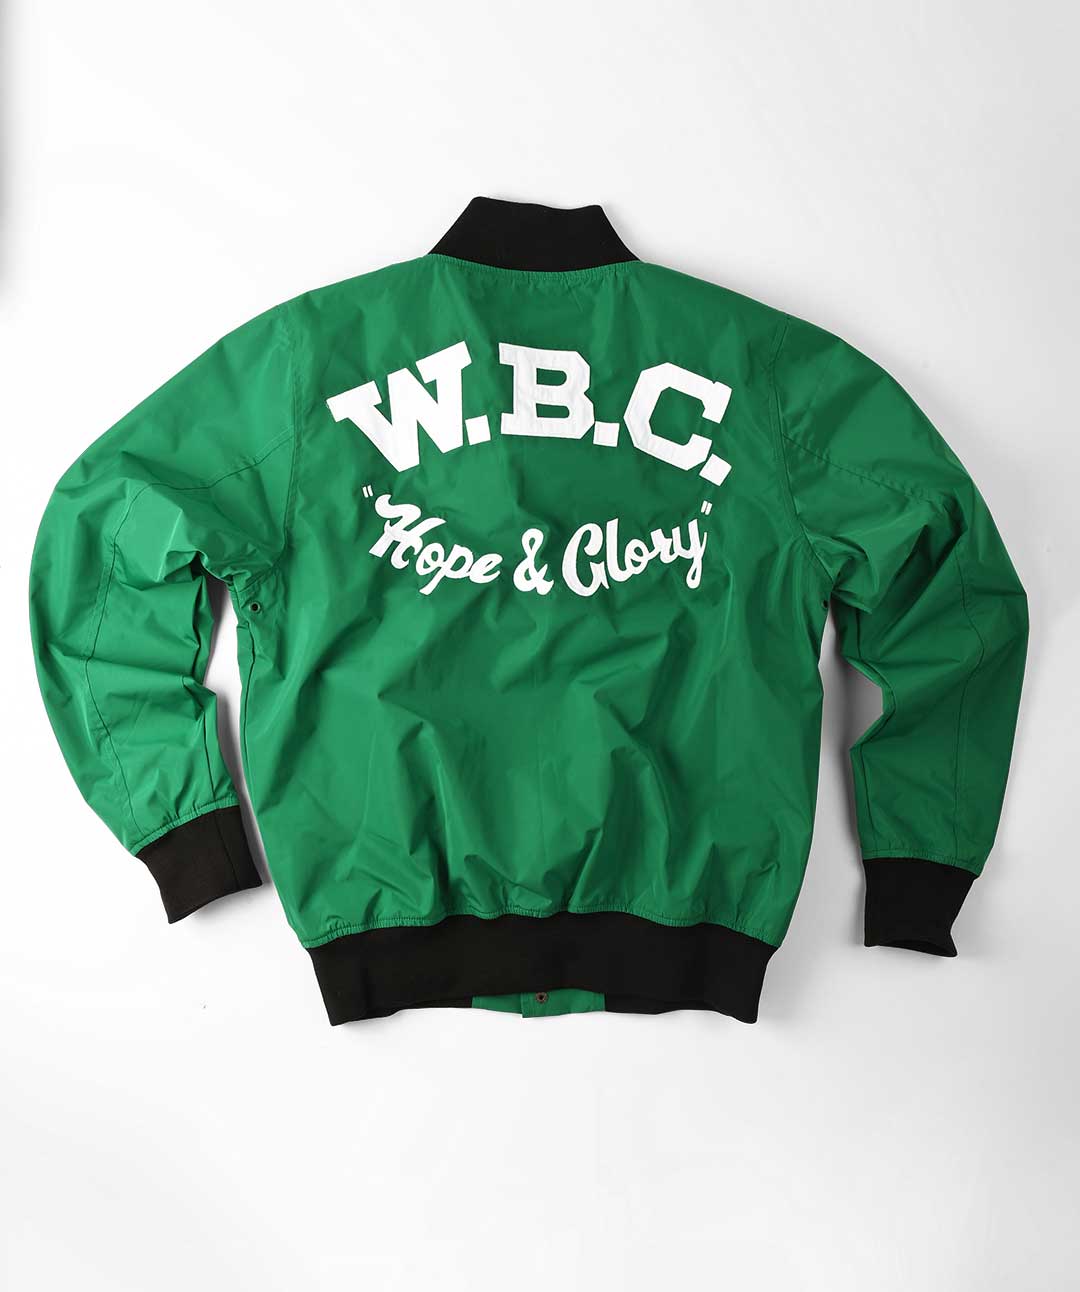 World Boxing Council Stadium Jacket - Roots of Fight Canada